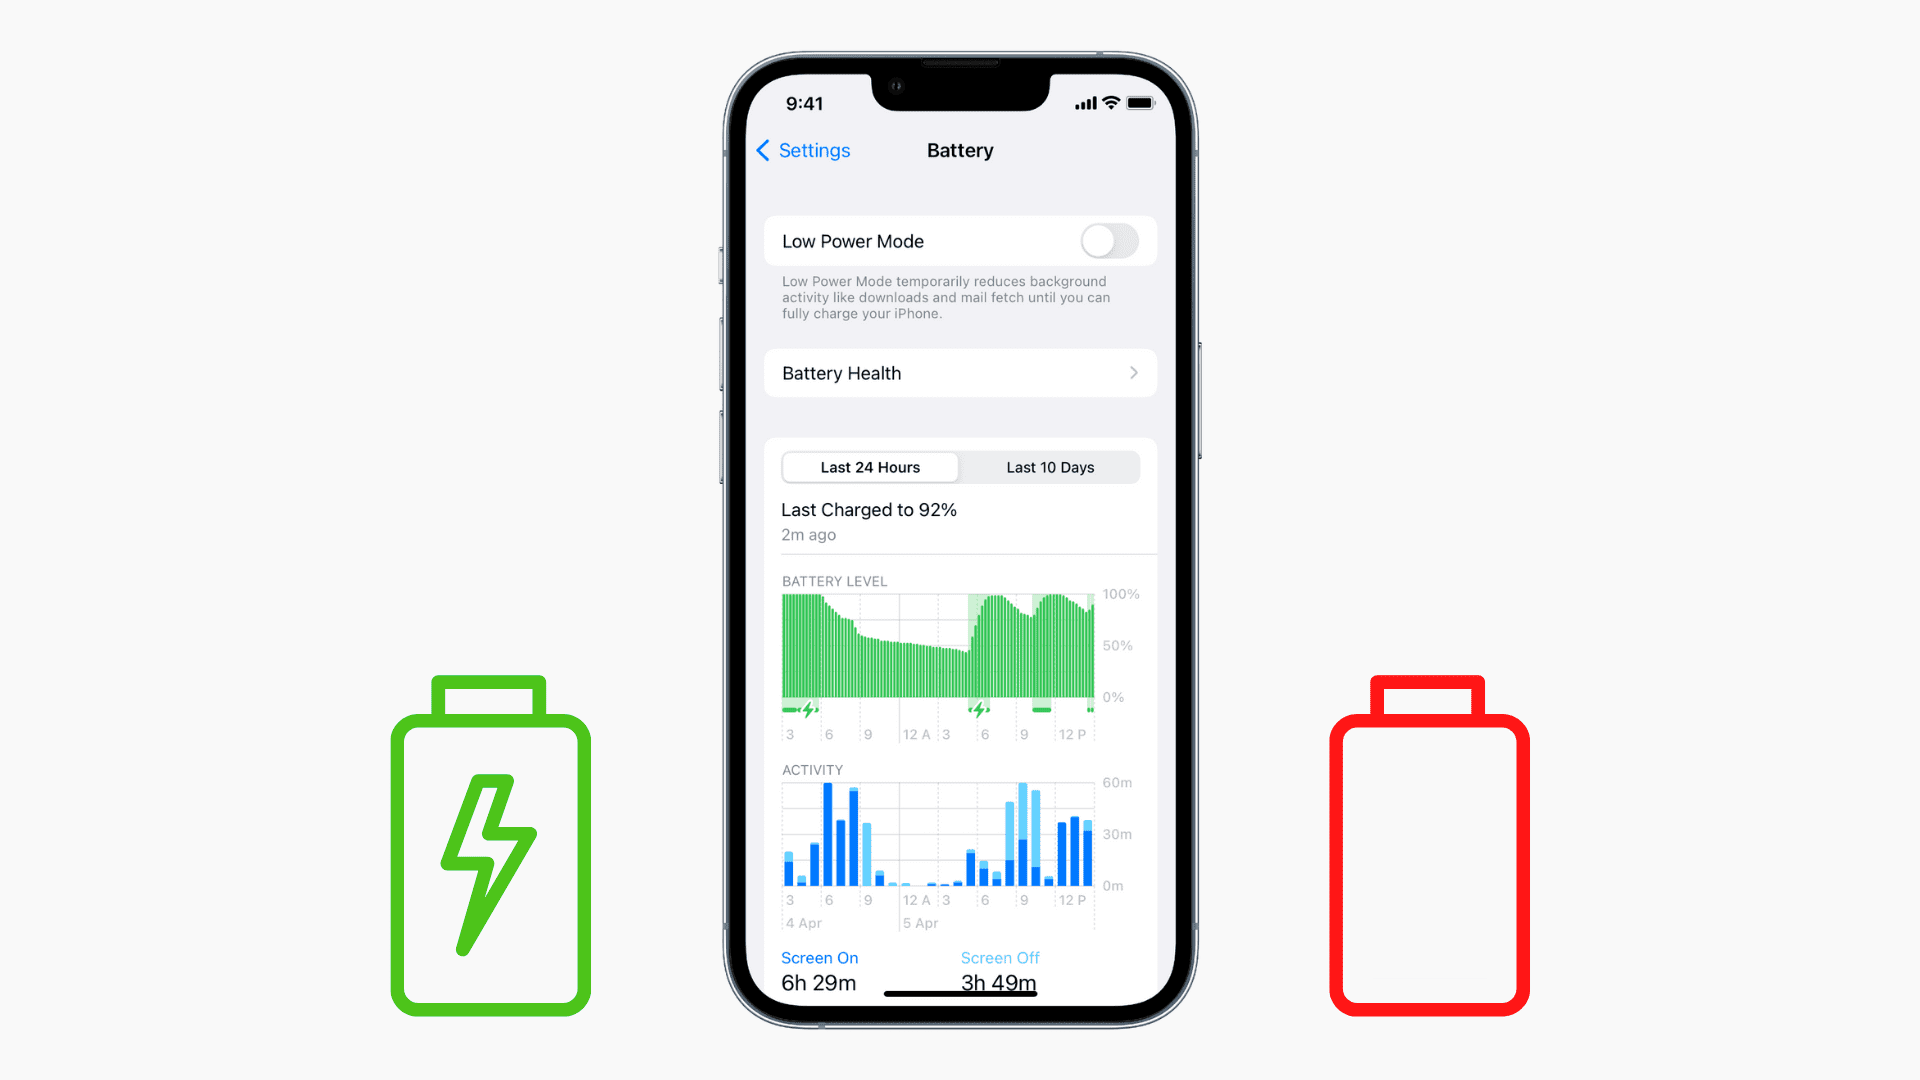 How to check iPhone battery health